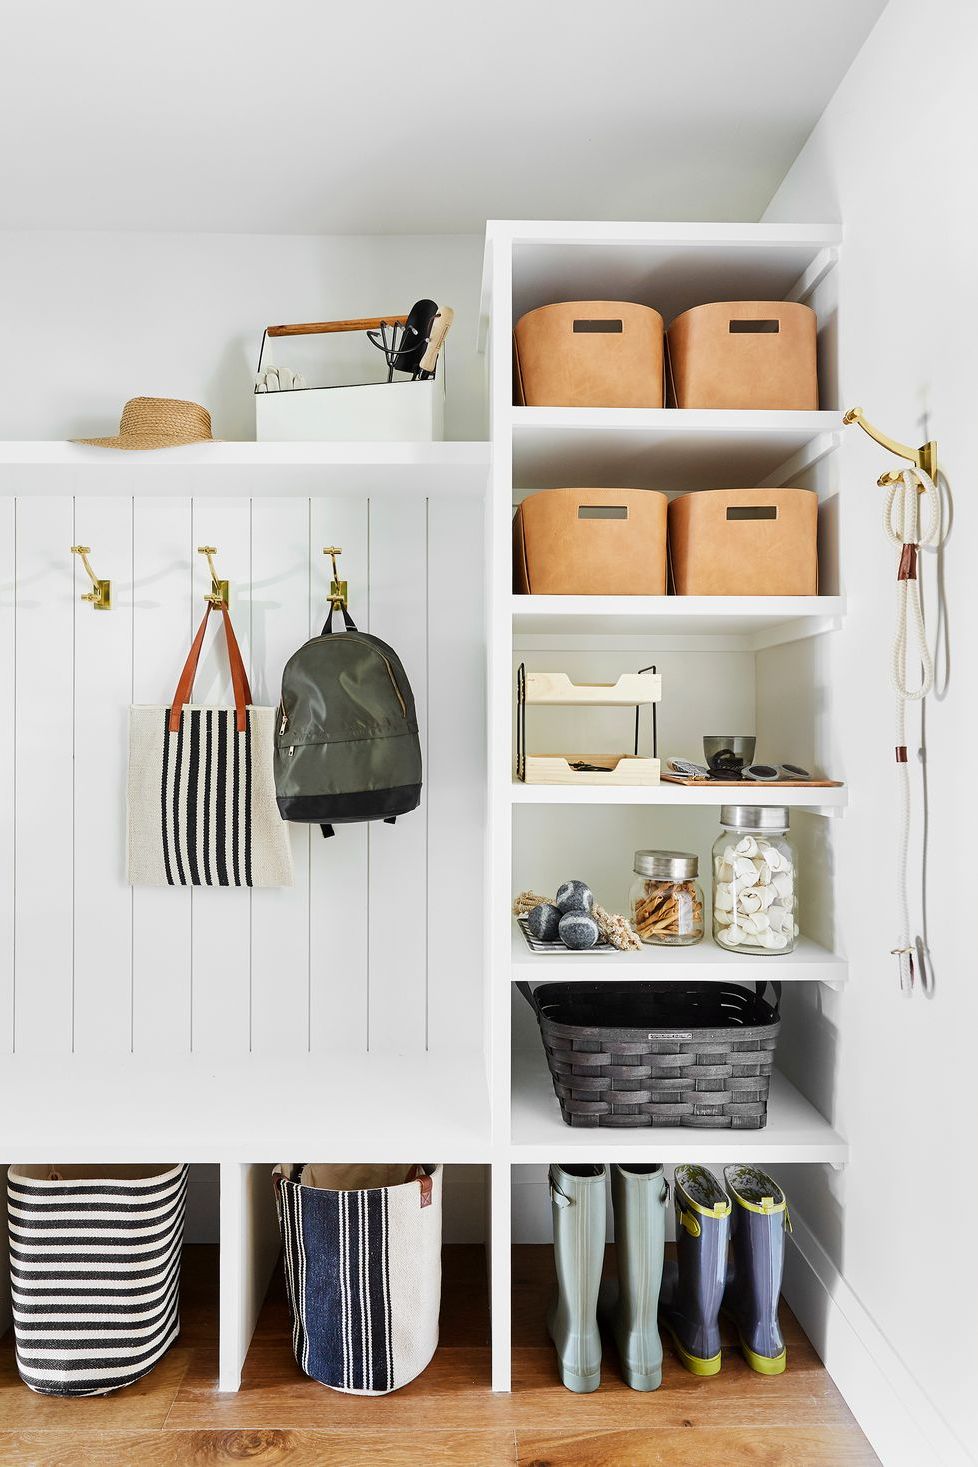 Organize Your Home for FREE  7 Creative Home Organizing Ideas